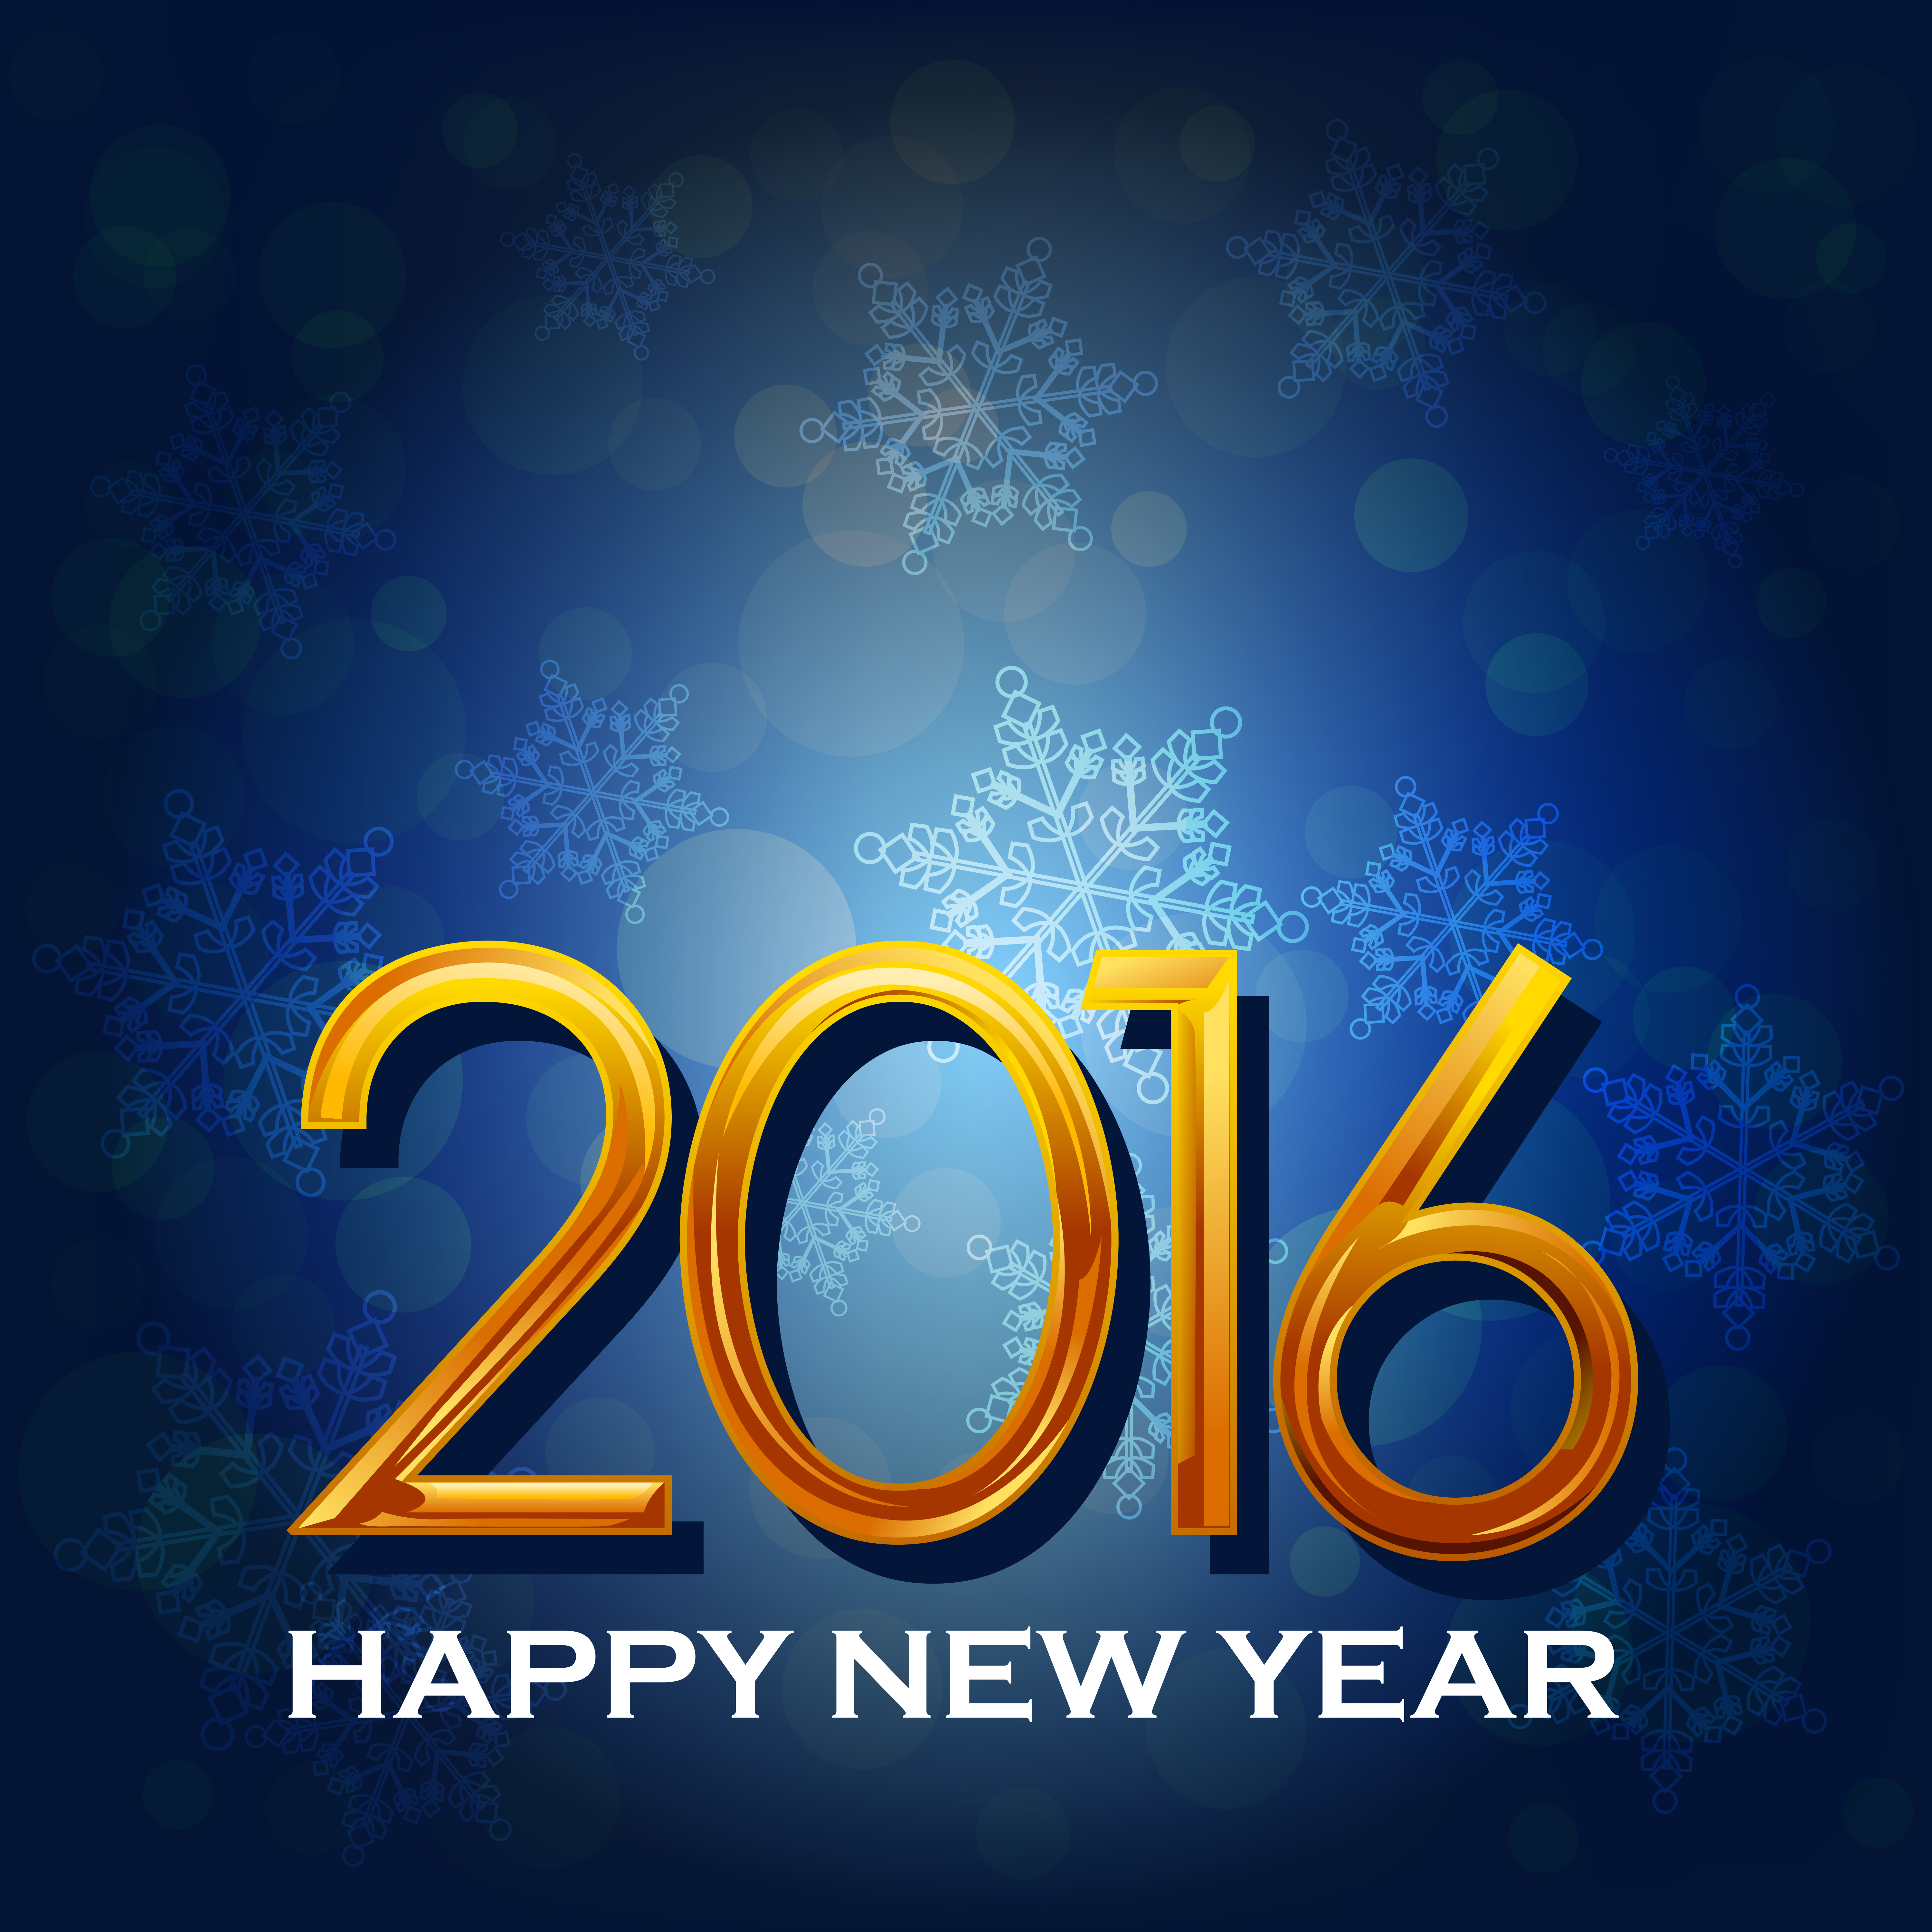 Happy 2016 from PWSC!